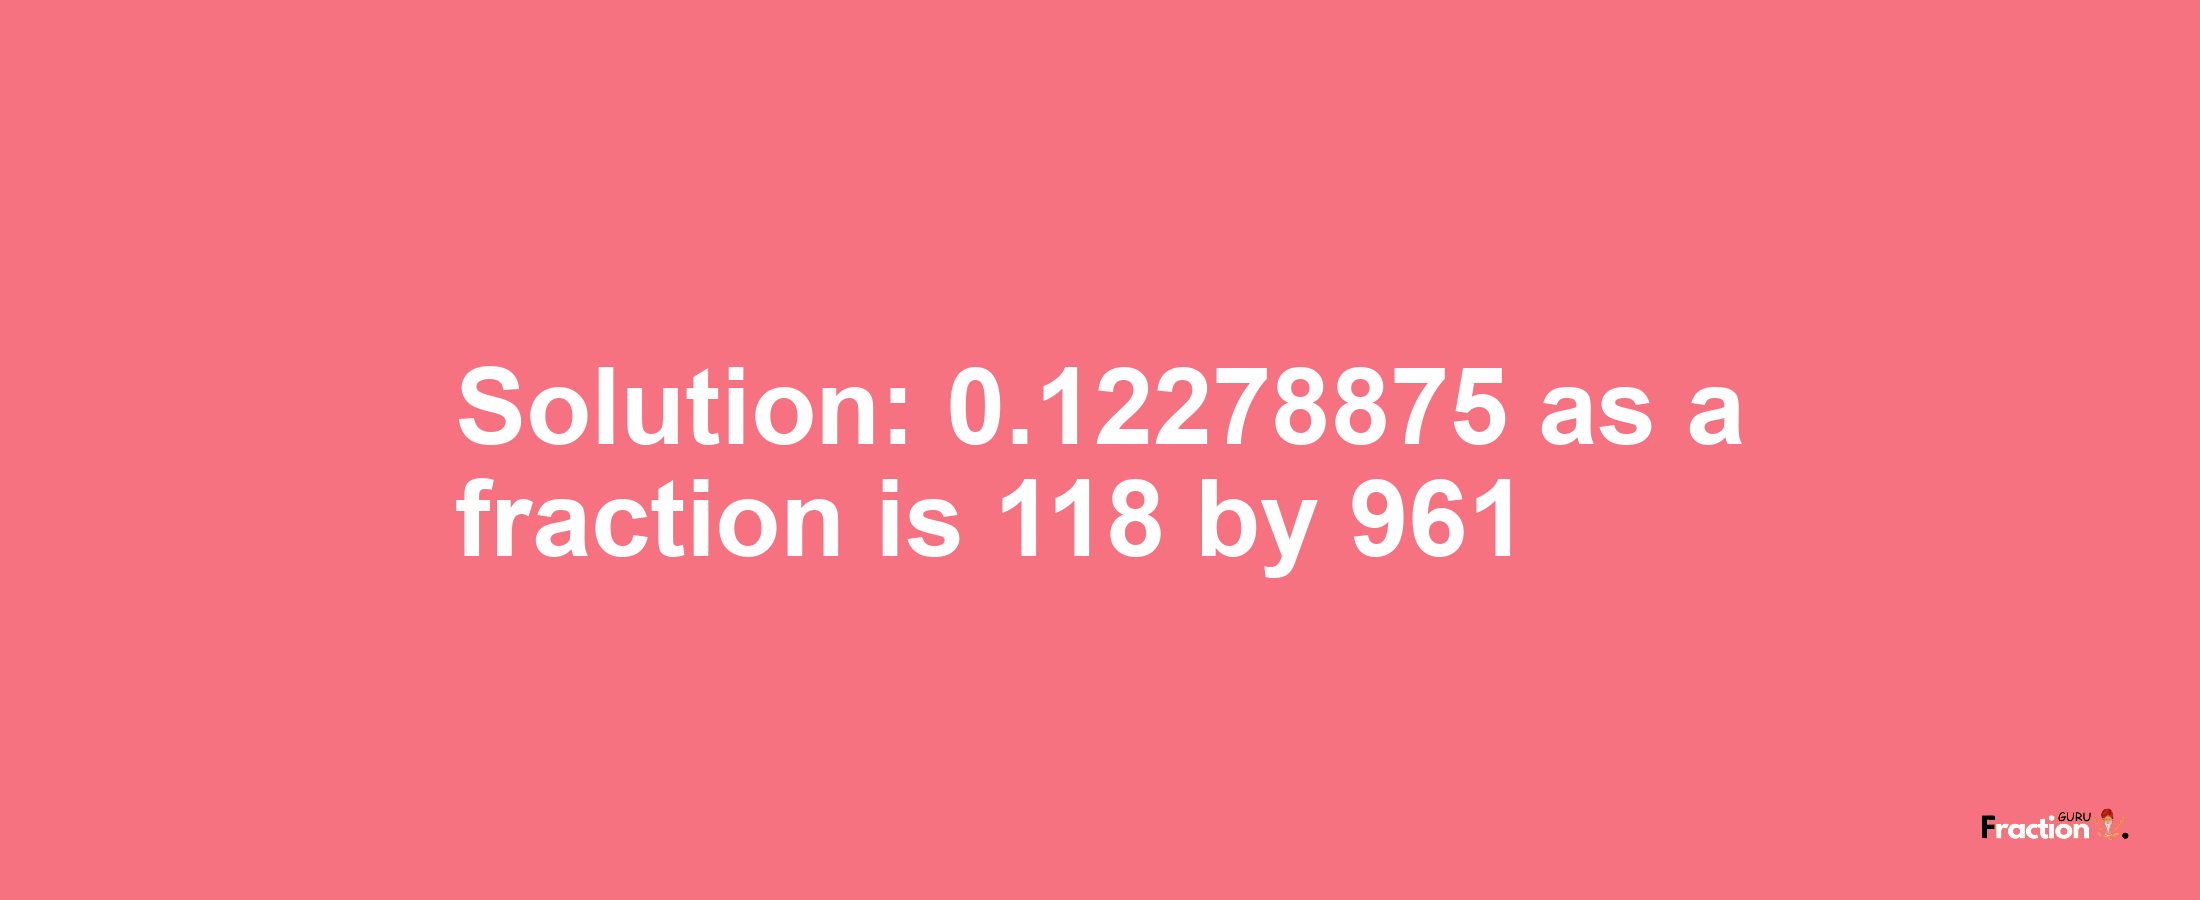 Solution:0.12278875 as a fraction is 118/961